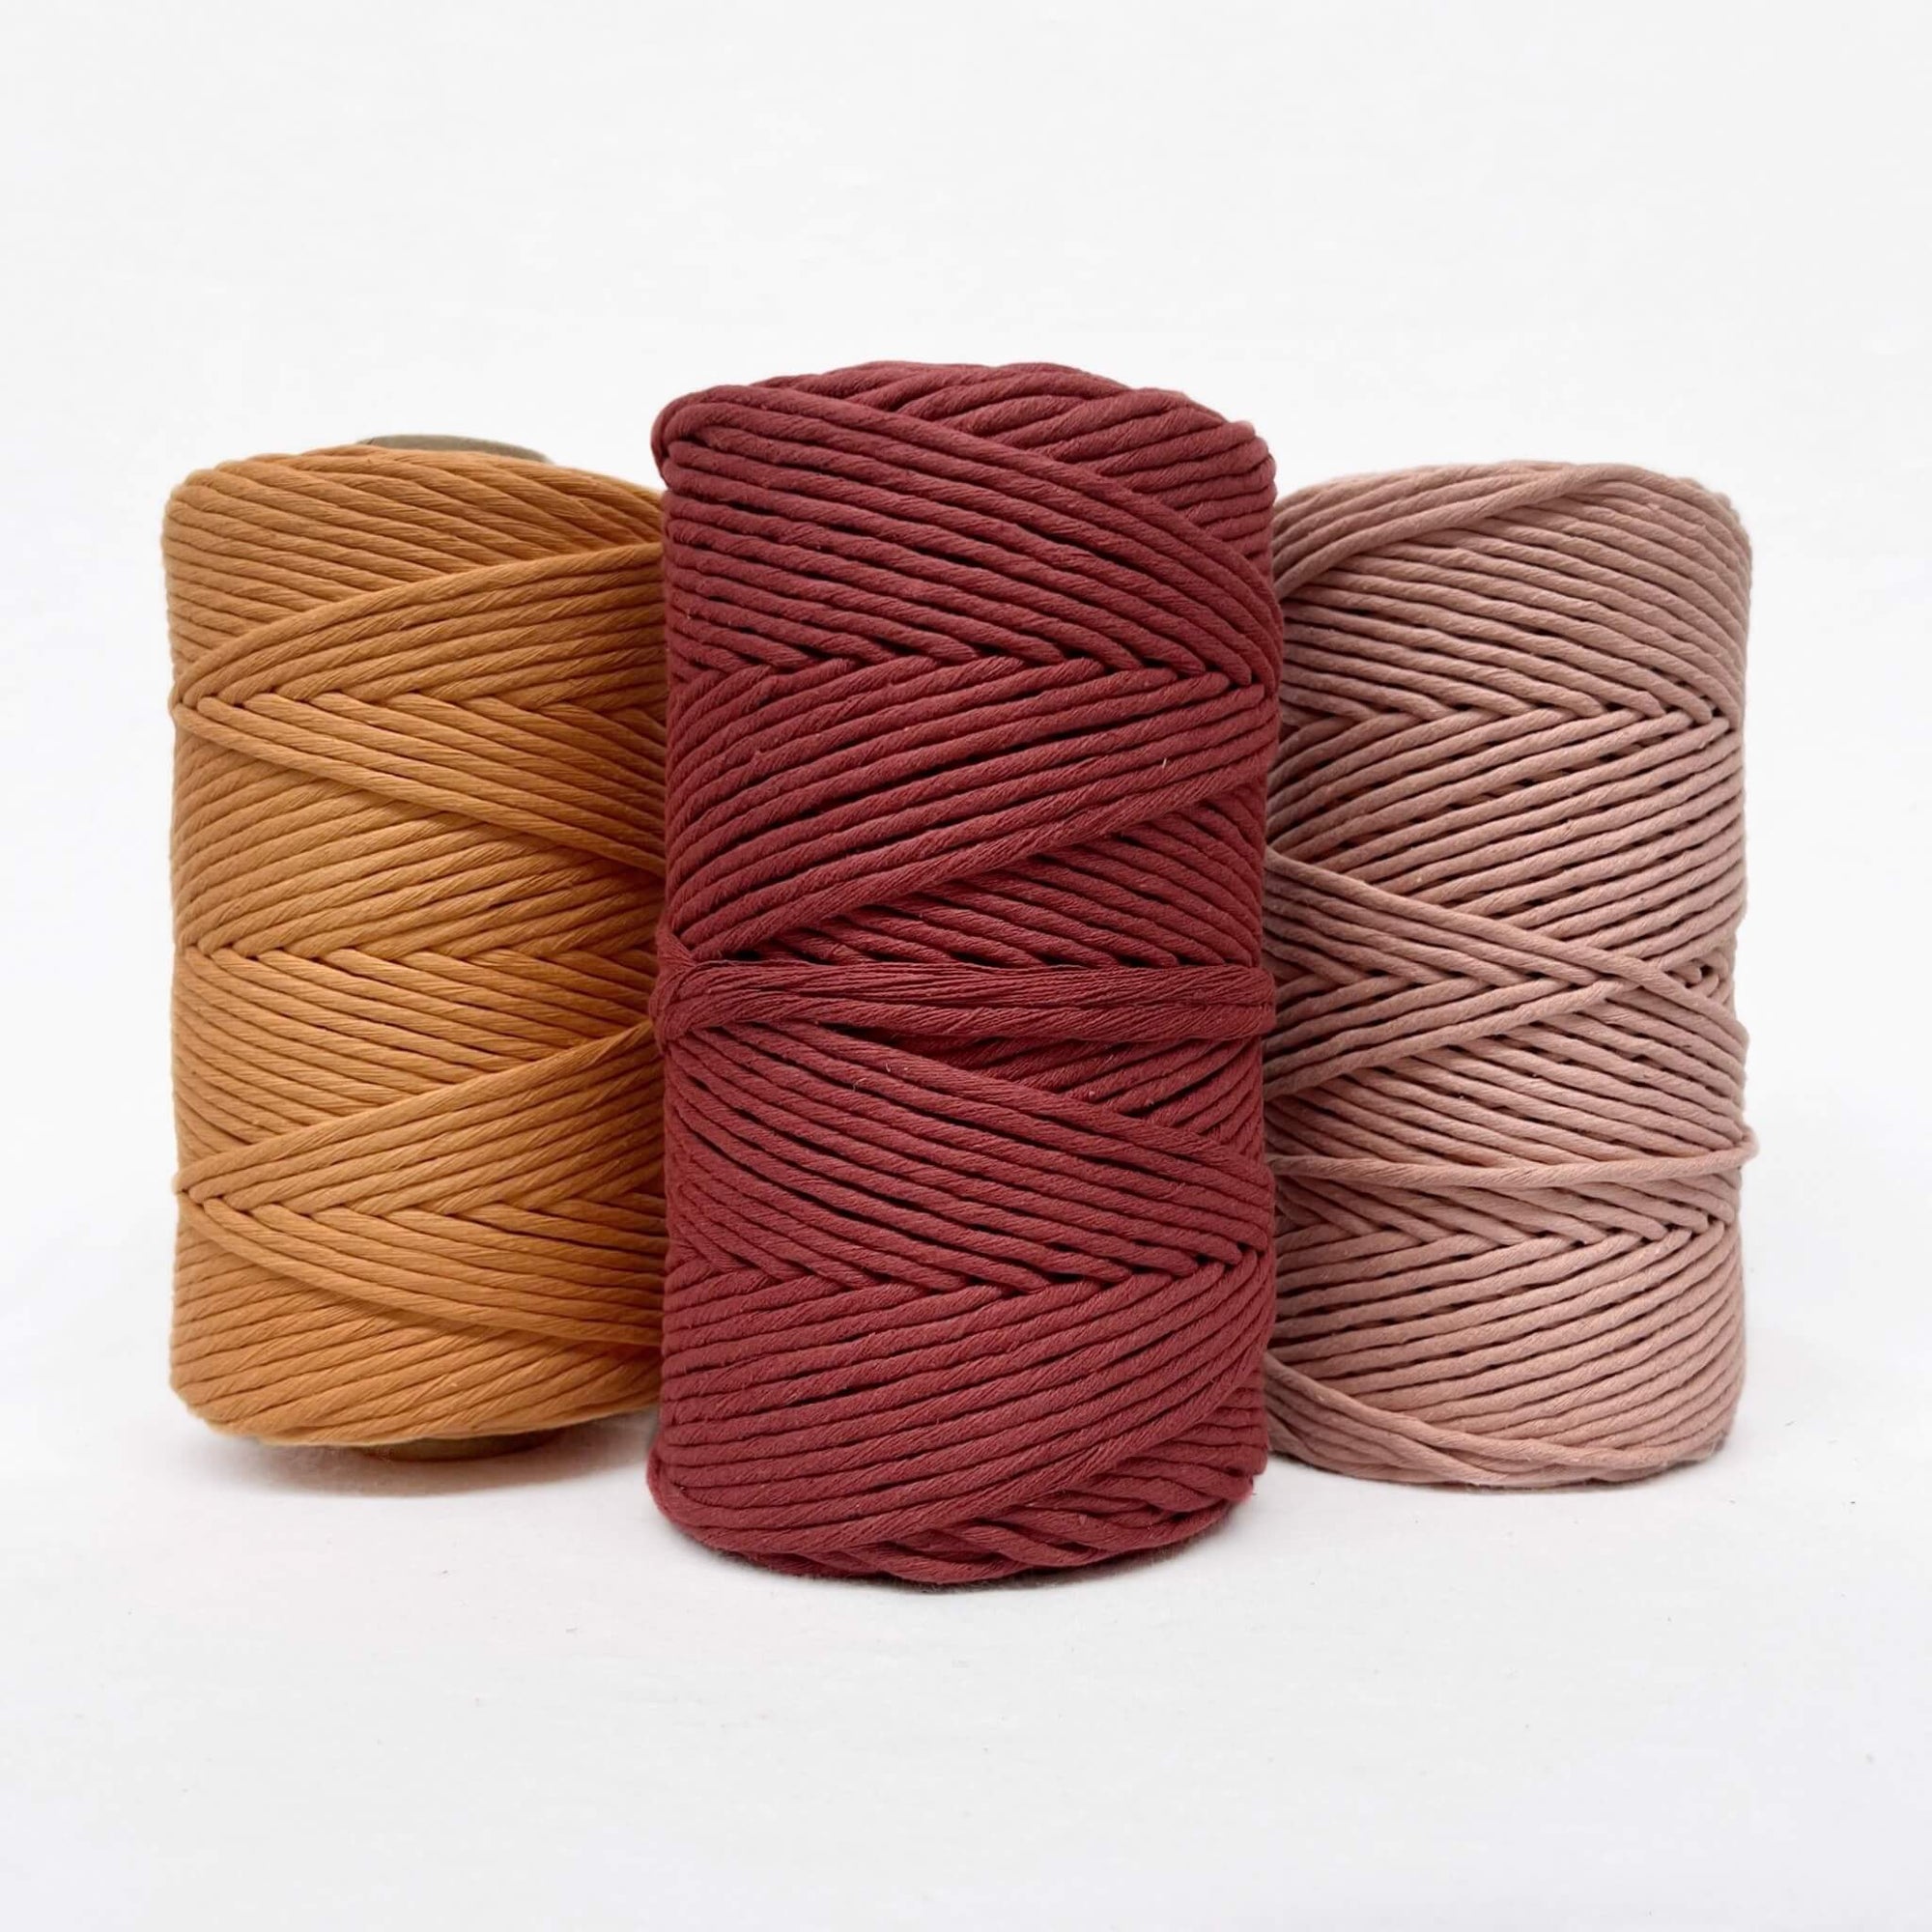 mary maker studio 1kg 5mm recycled cotton macrame string in spicy apple butter red colour buy online for macrame workshops beginners and advanced artists